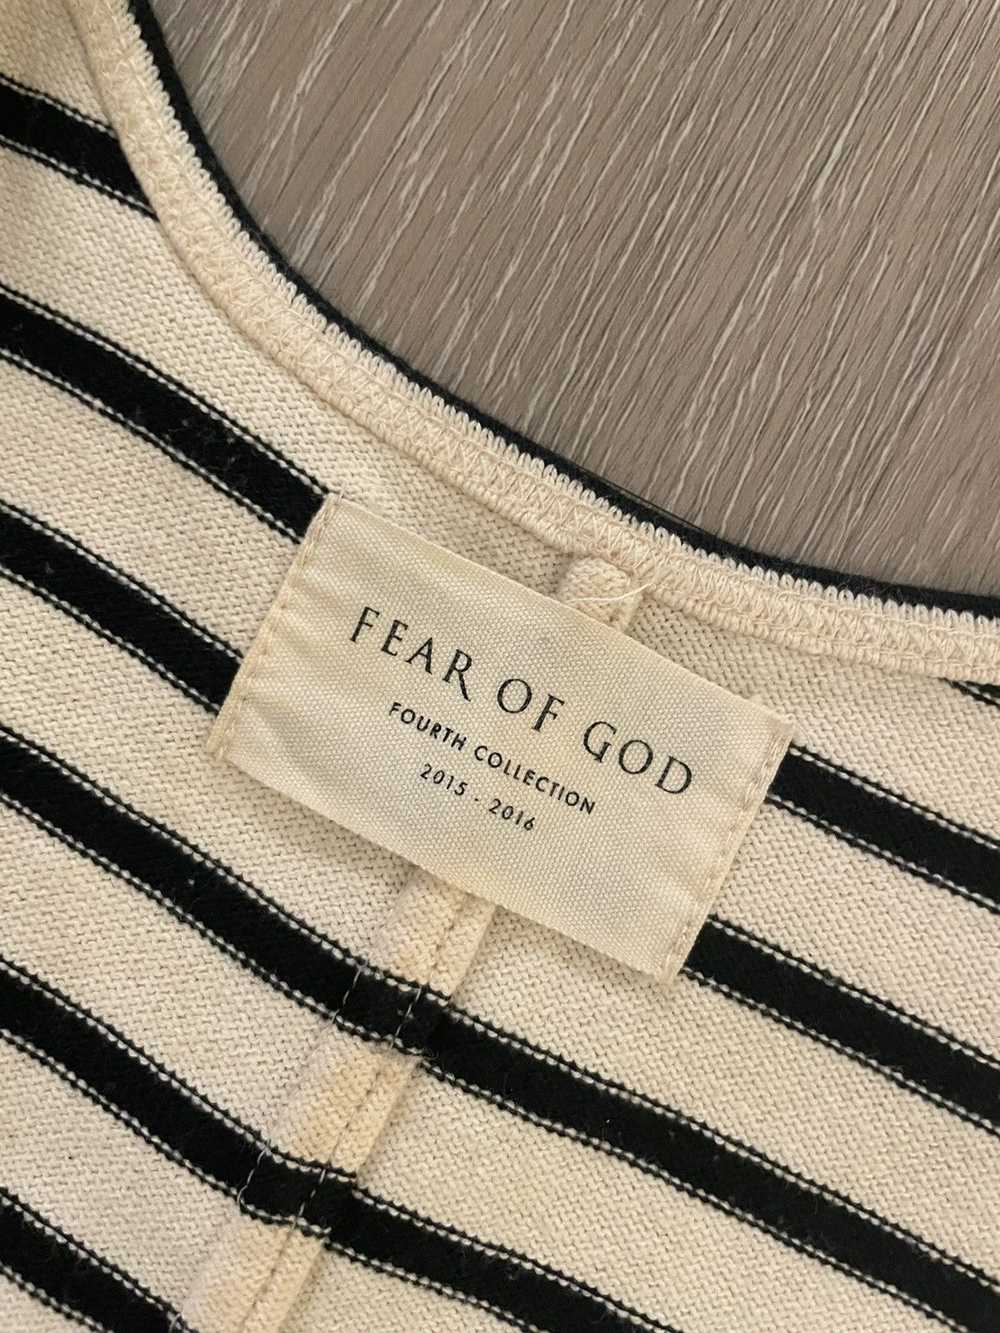 Fear of God Fear of god fourth collection stripe … - image 2